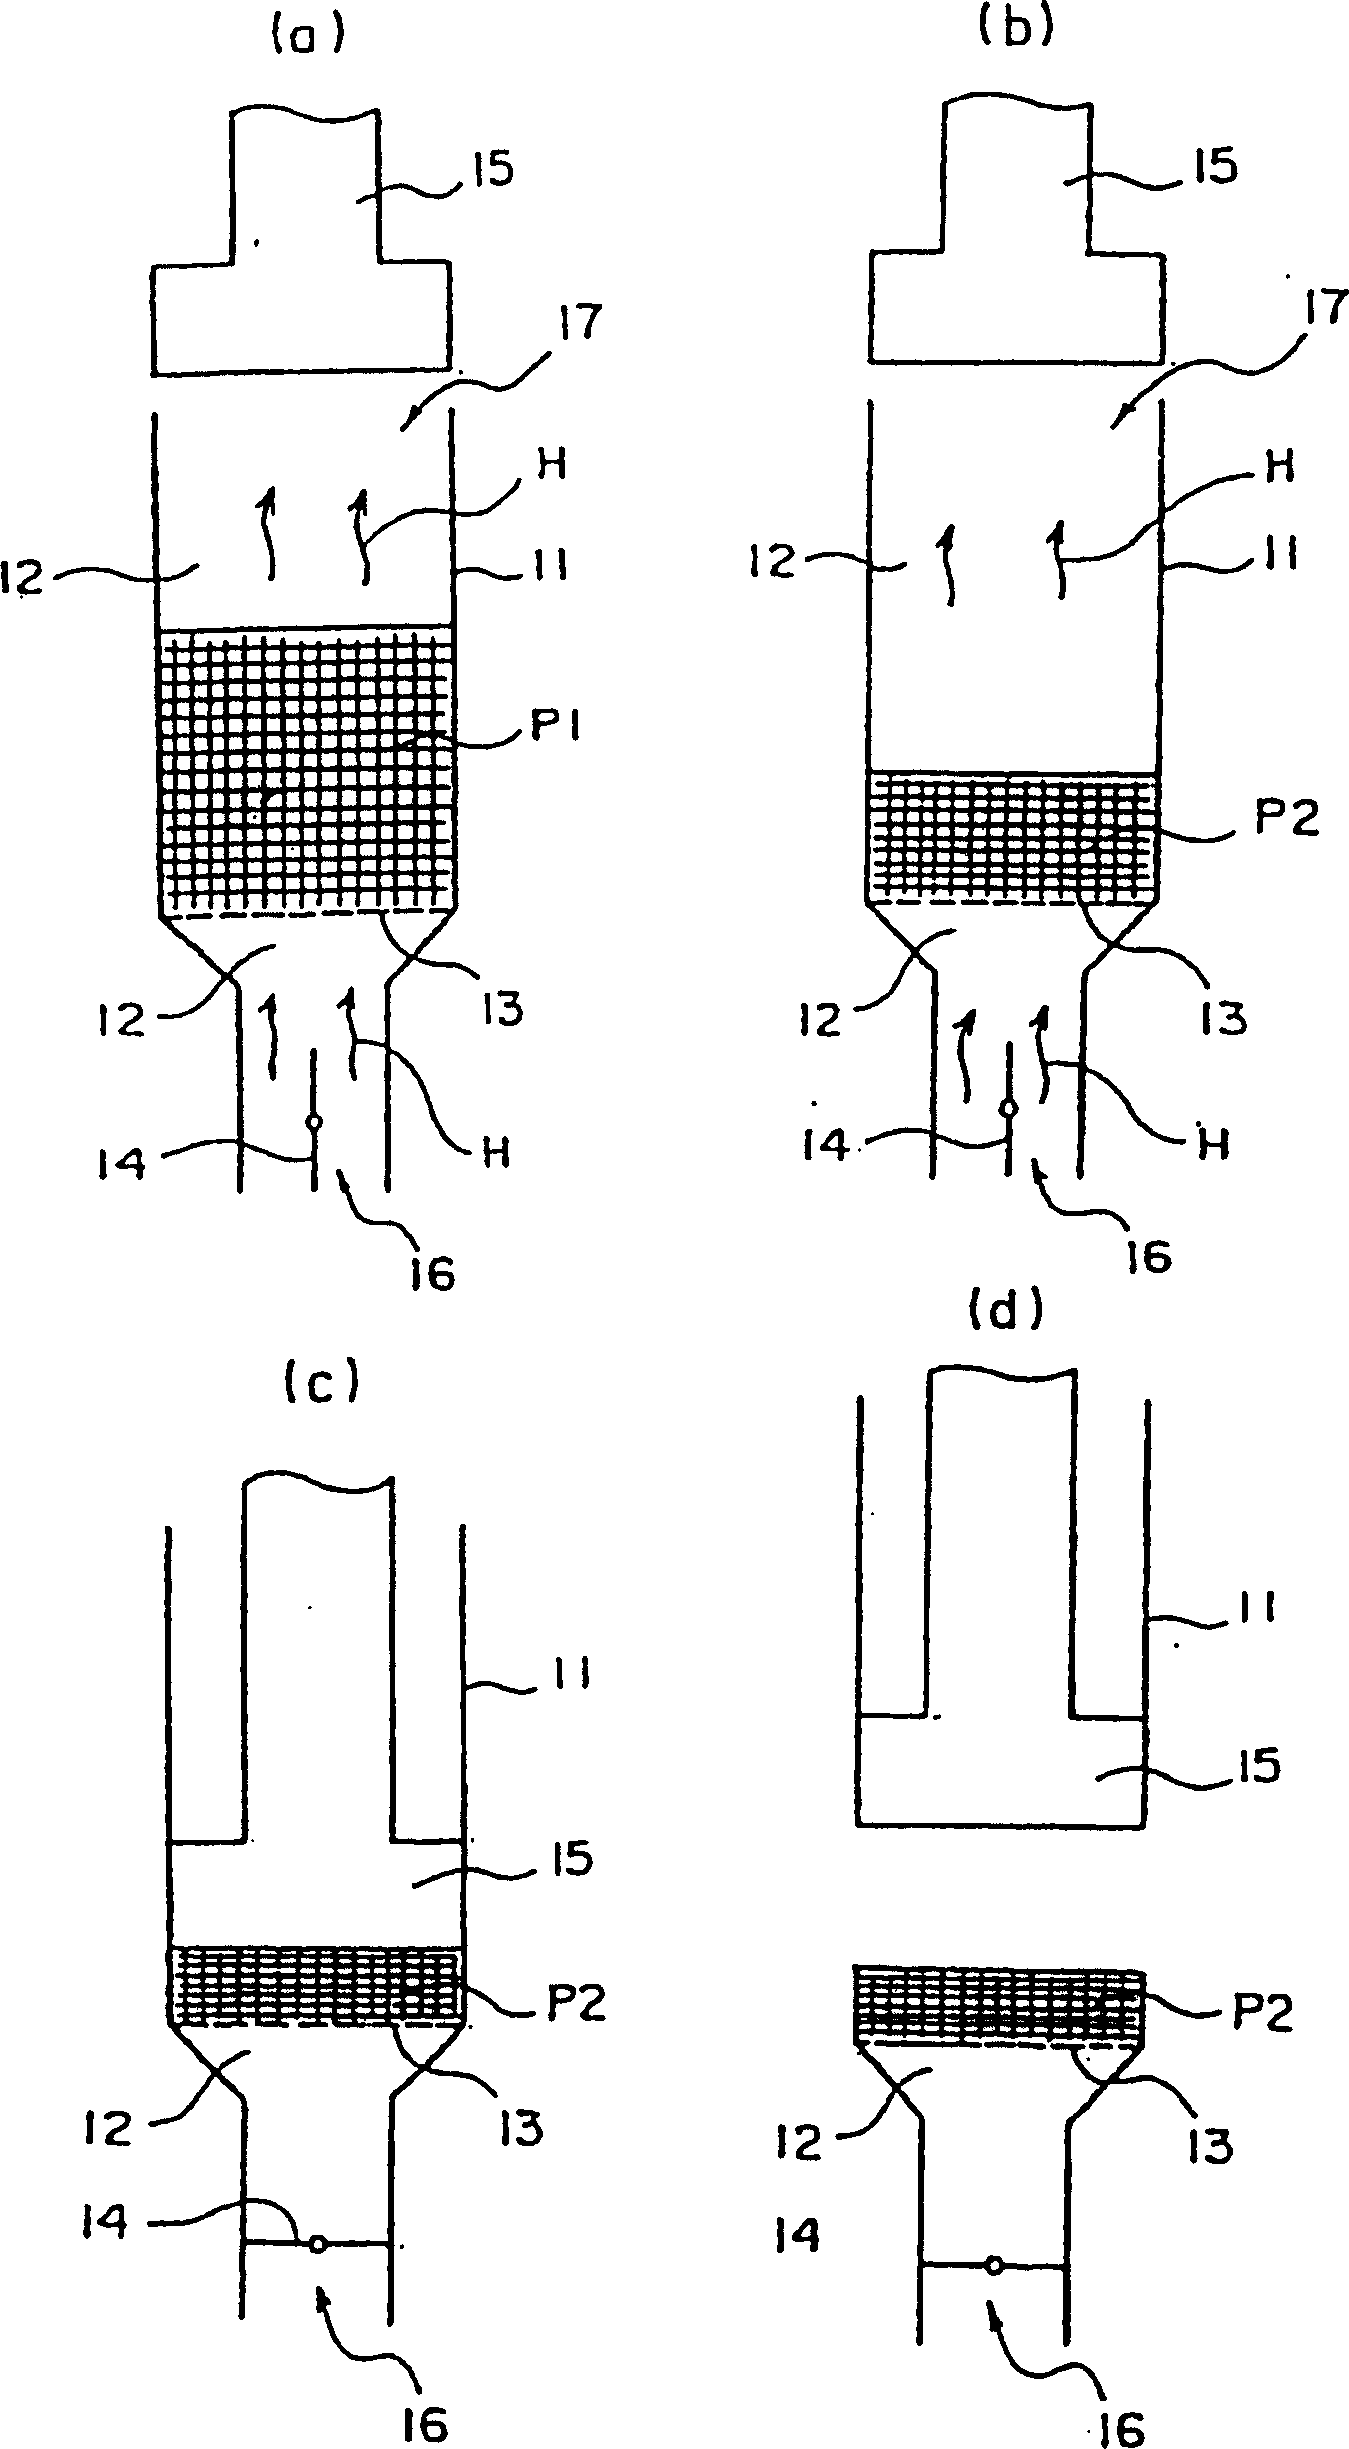 Process for producing a fiber-reinforced thermoplastic resin molded product and product thereby produced